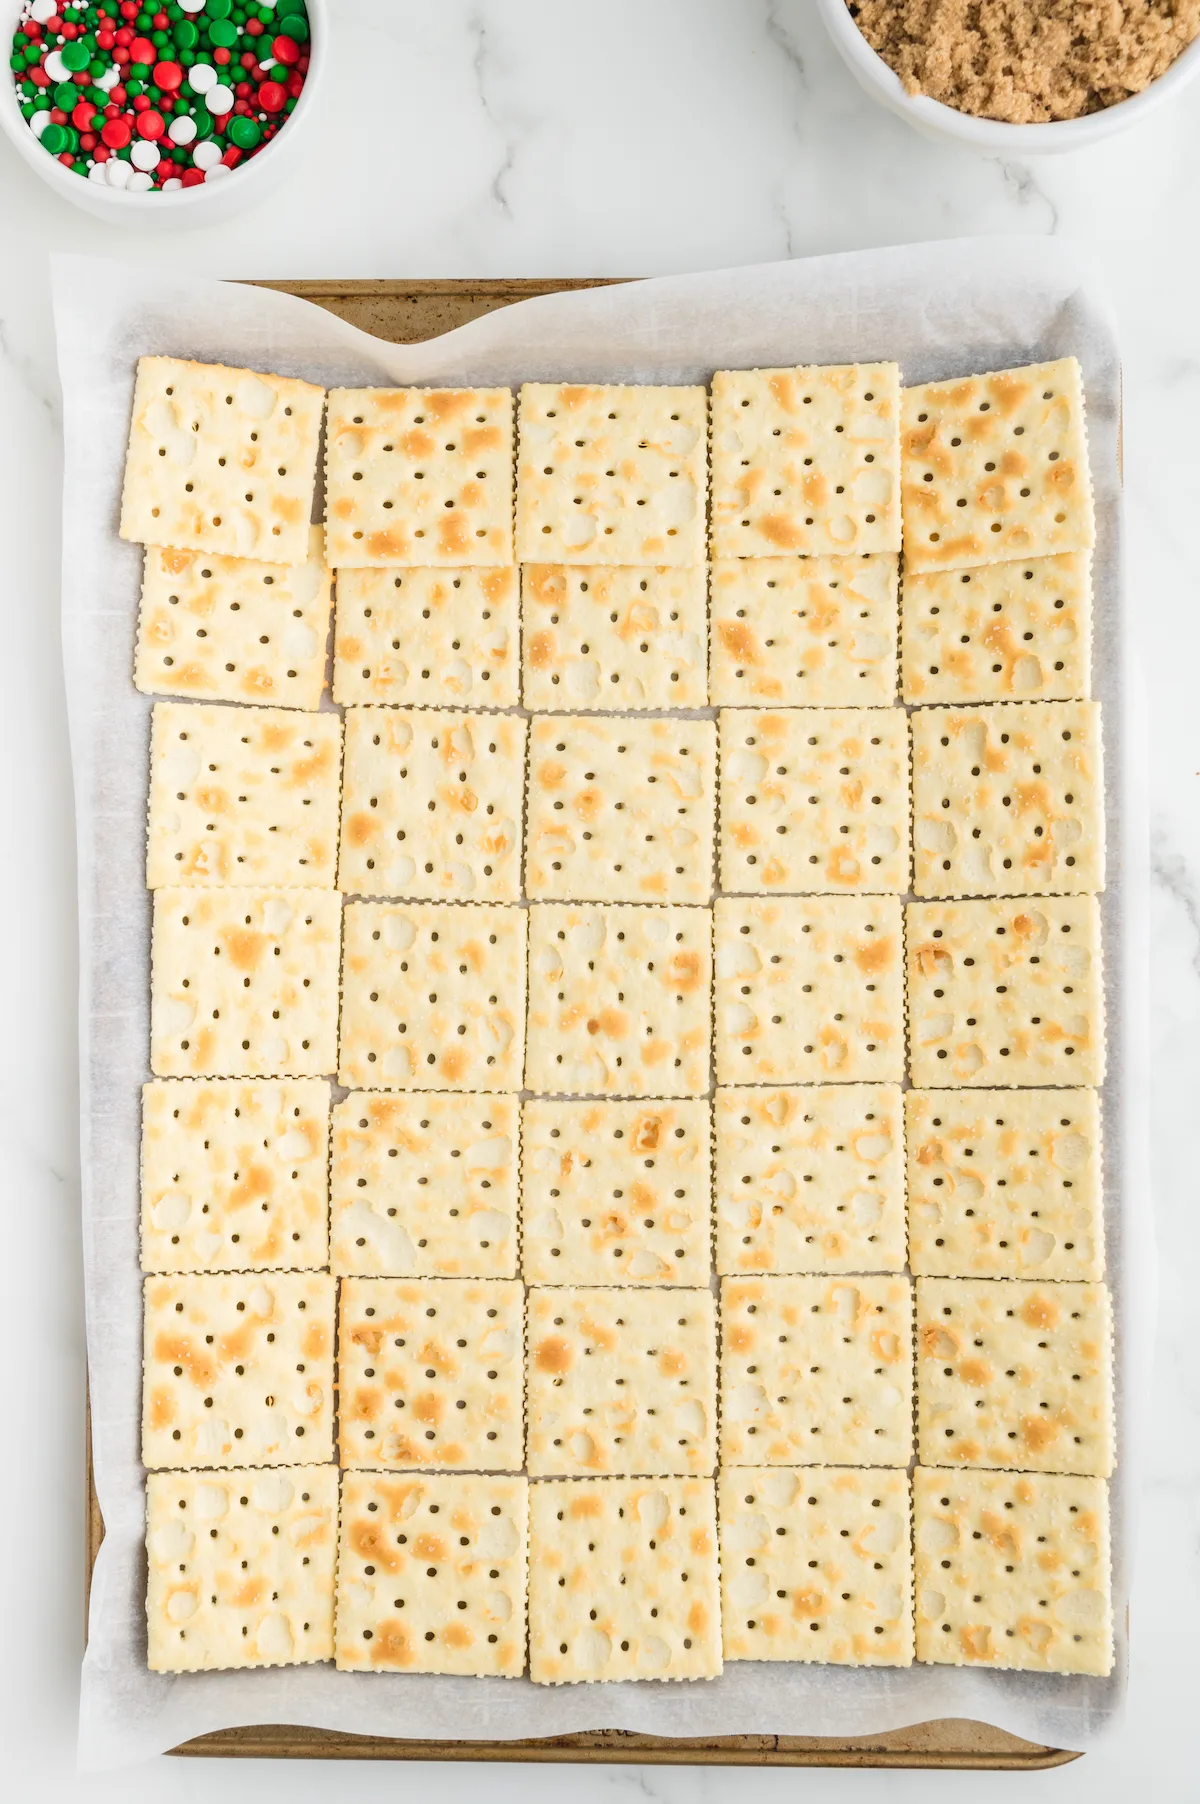 Saltine crackers laid in a single layer on a baking sheet